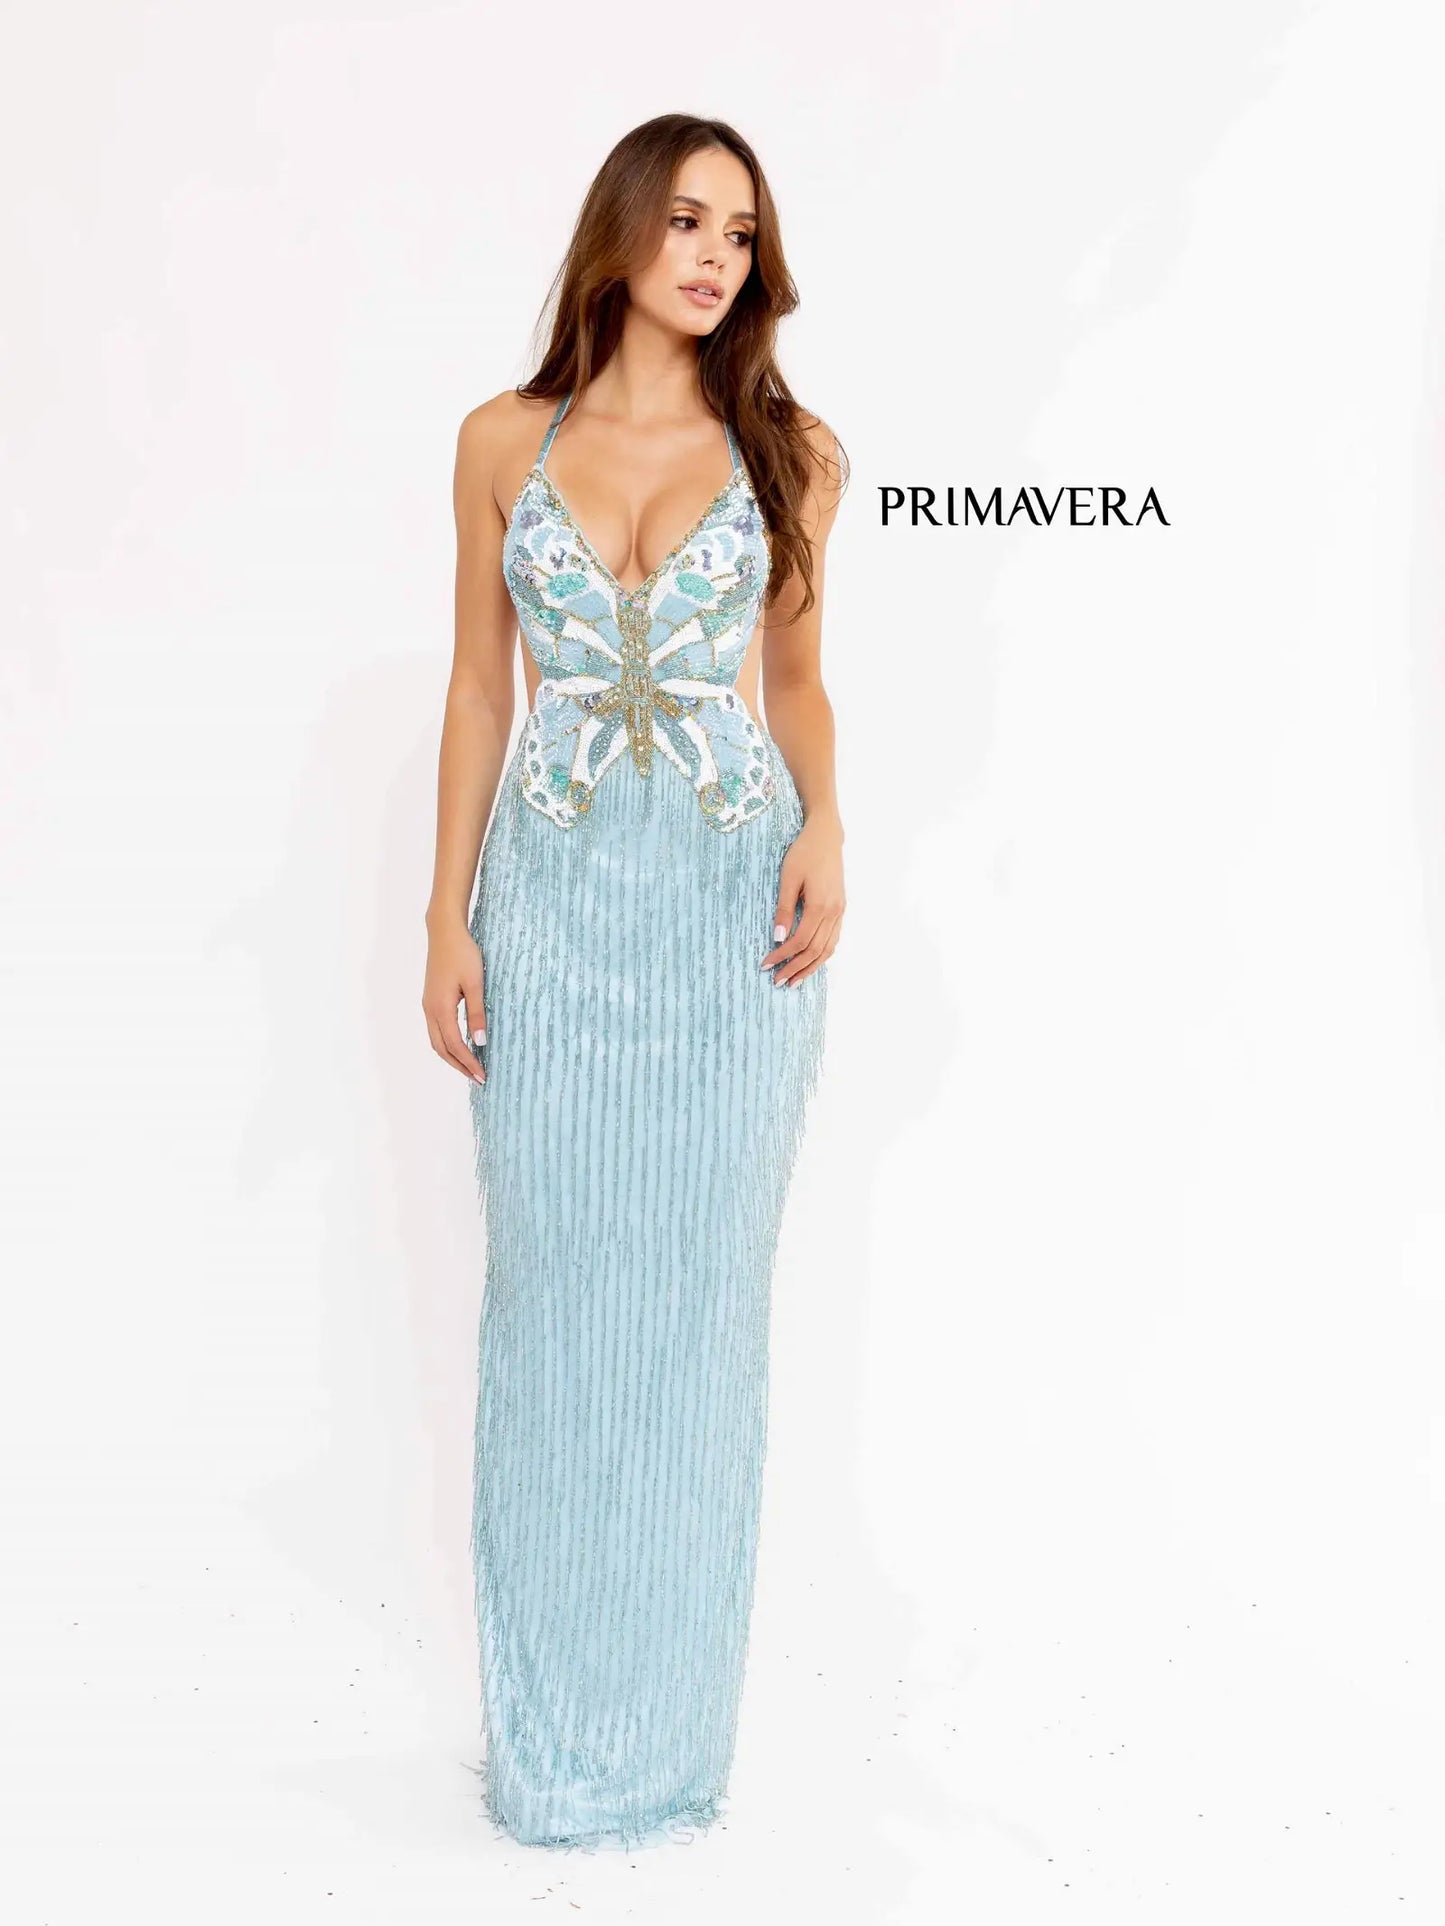 Primavera Couture 3966 Prom Dress Long Fringe Beaded Gown Butterfly Backless Formal